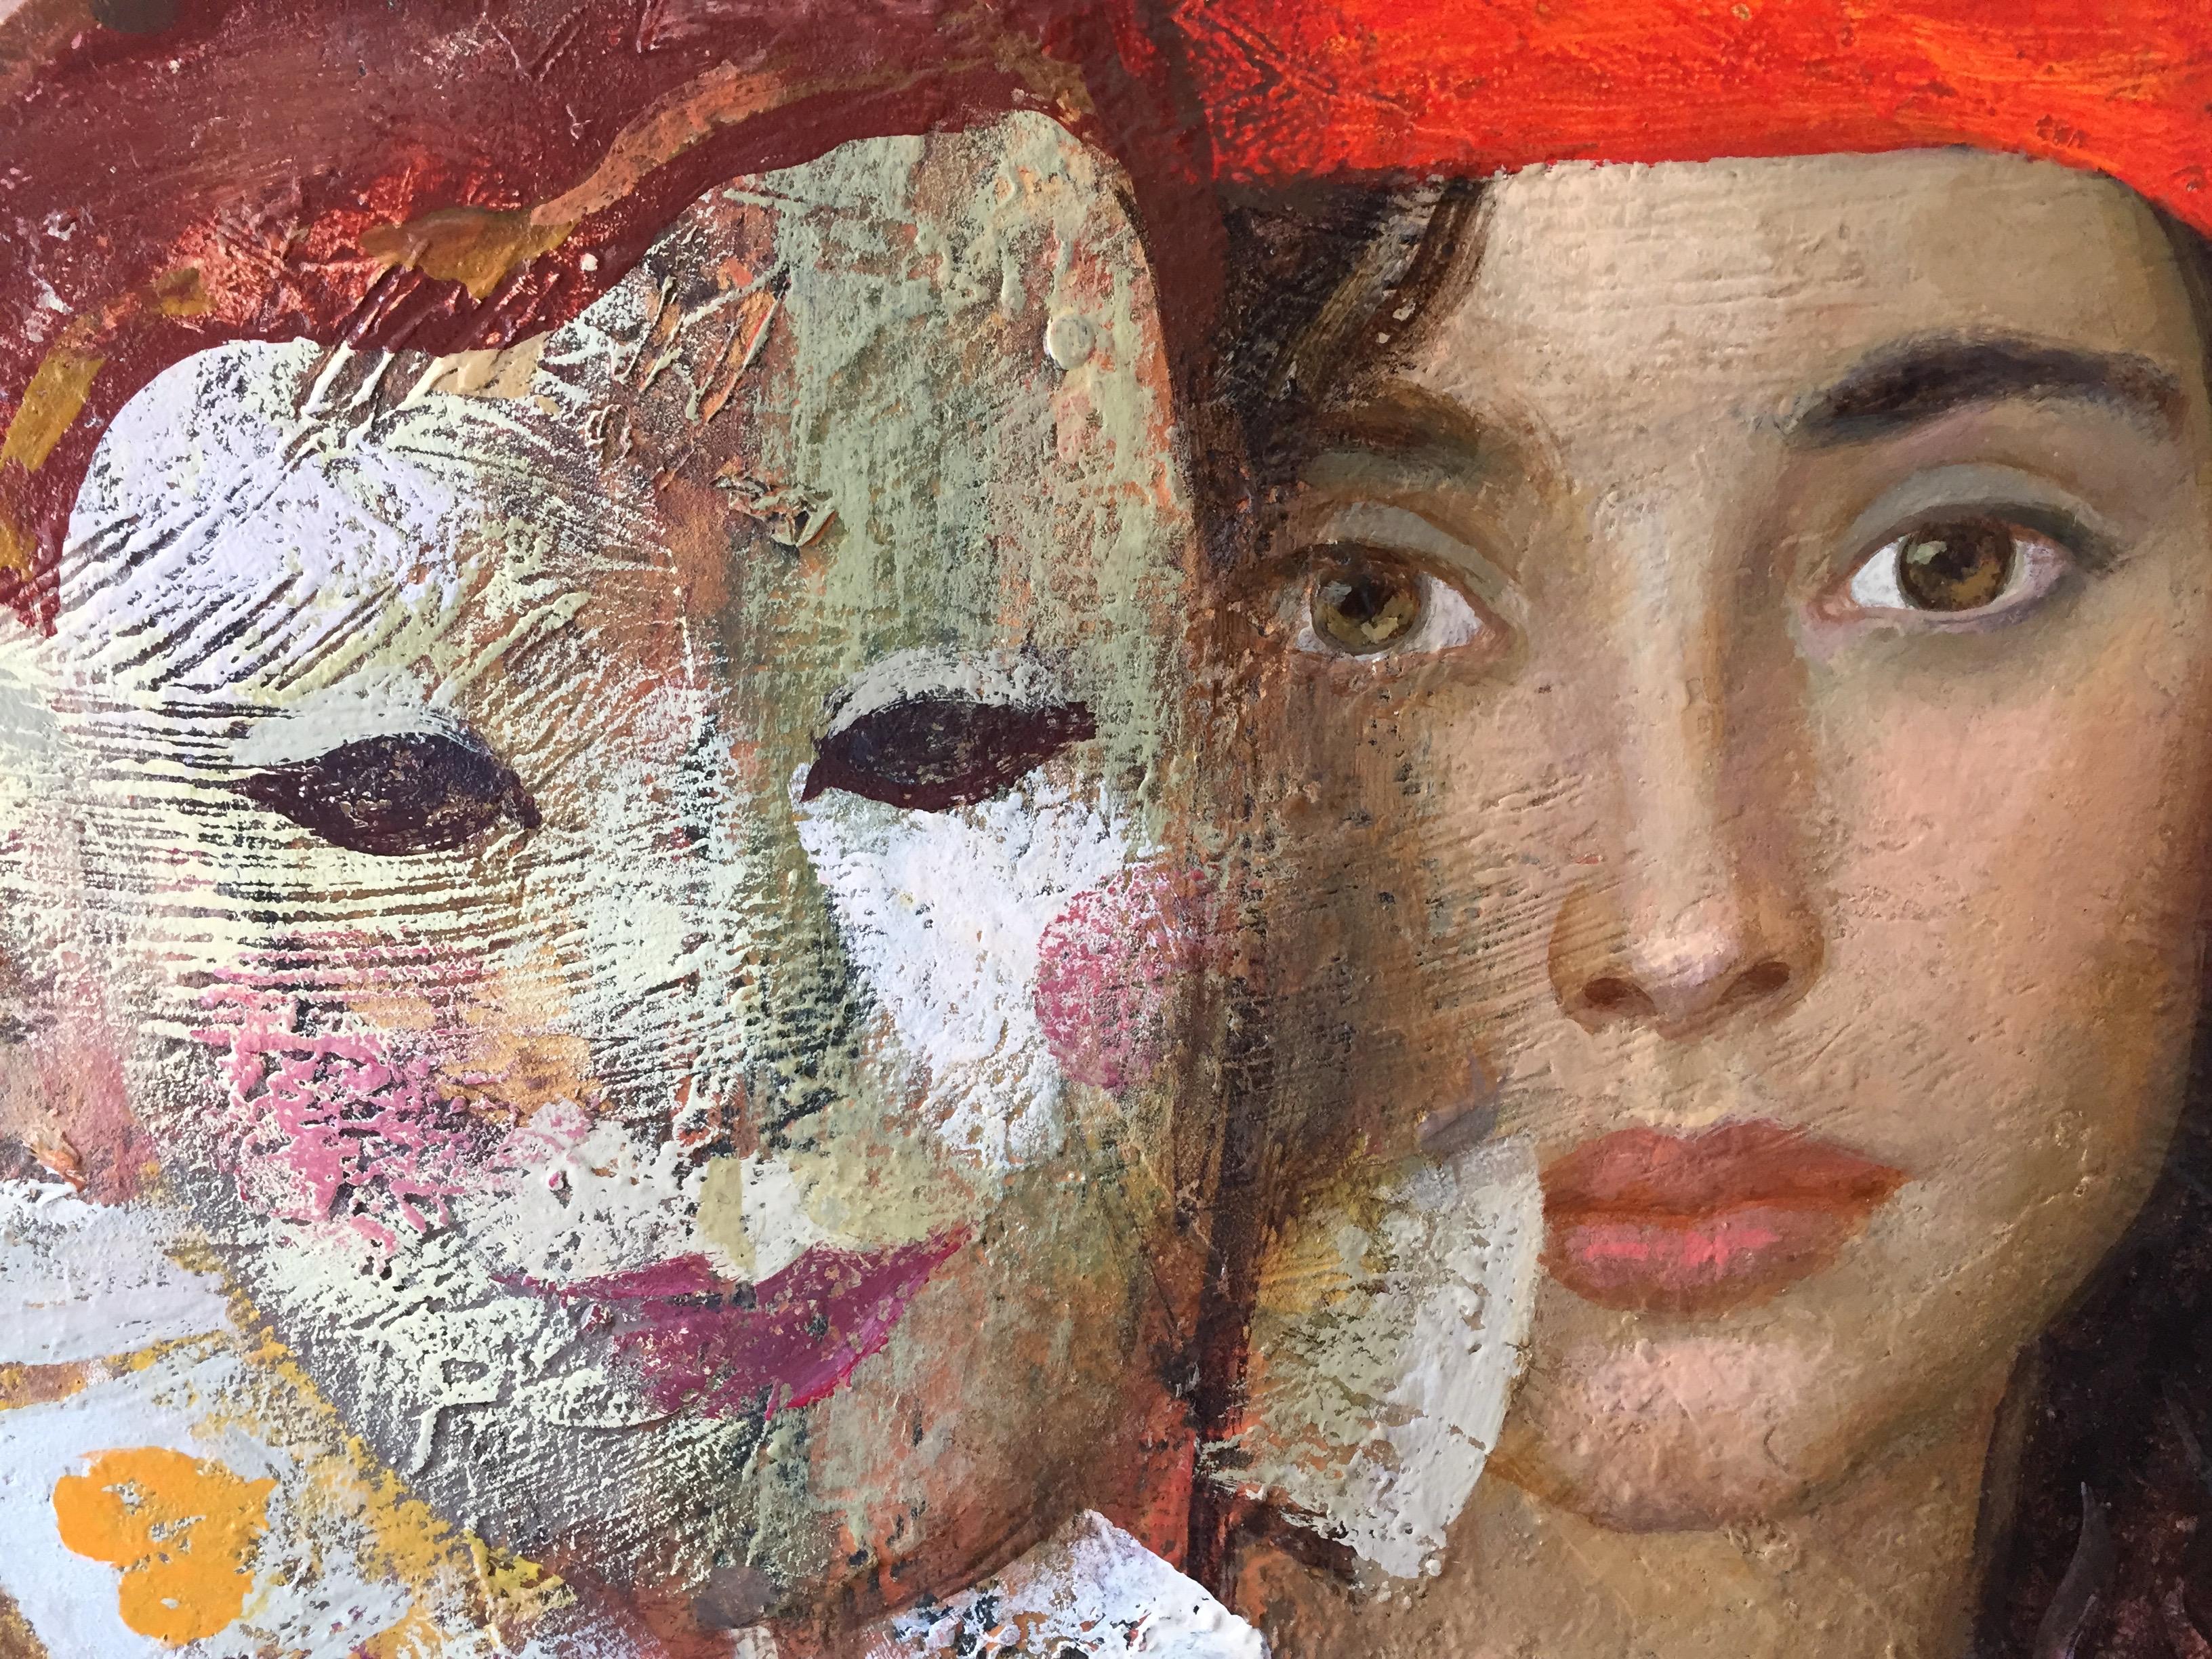 Casting, figurative painting (beautiful women and colorful masks)  - Painting by Goyo Dominguez